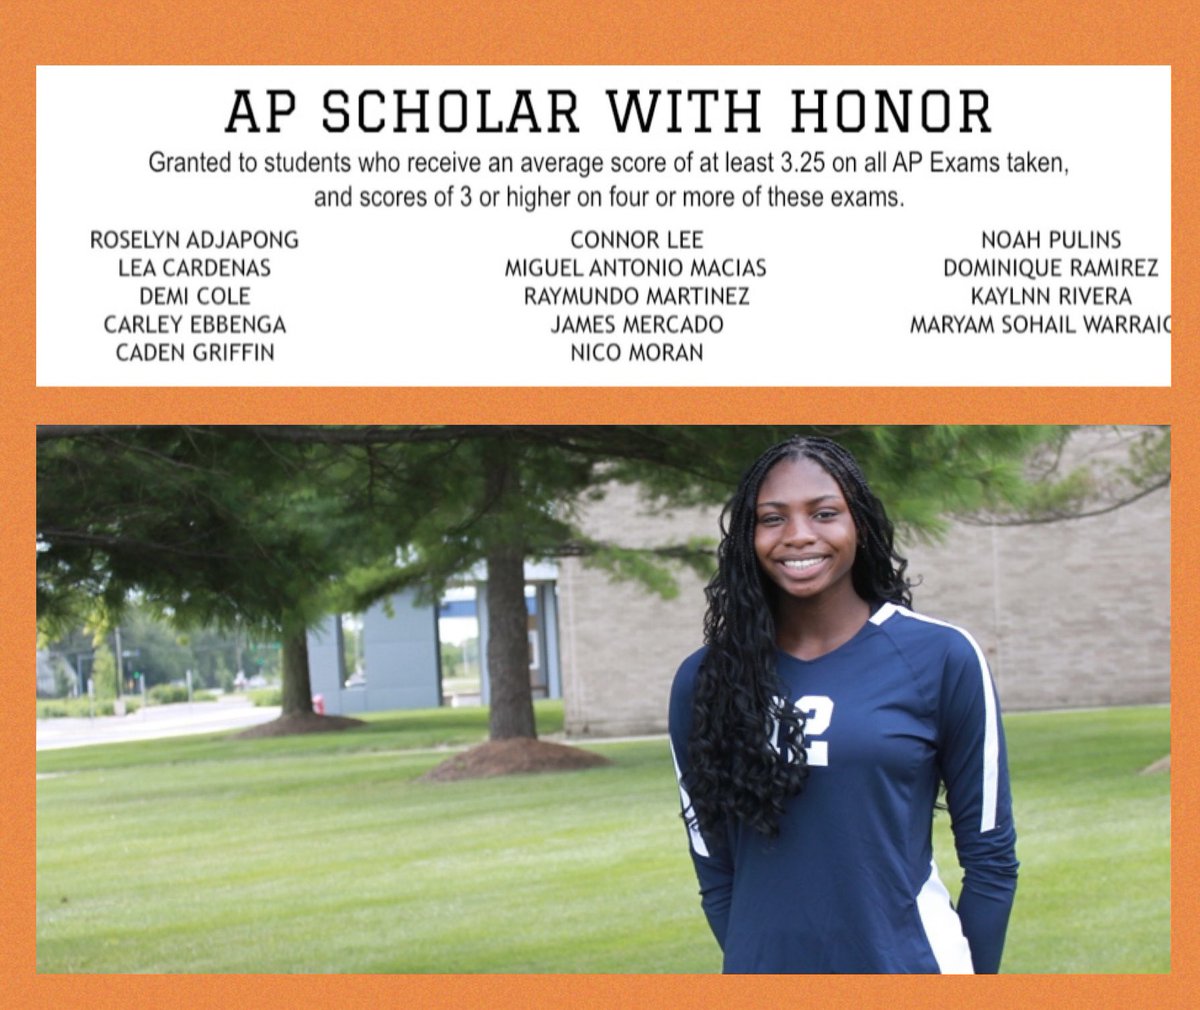 Incredibly proud of our varsity volleyball student athletes and their accomplishments in the classroom as well. We are so proud of you! #top10percent #APscholar #spartans